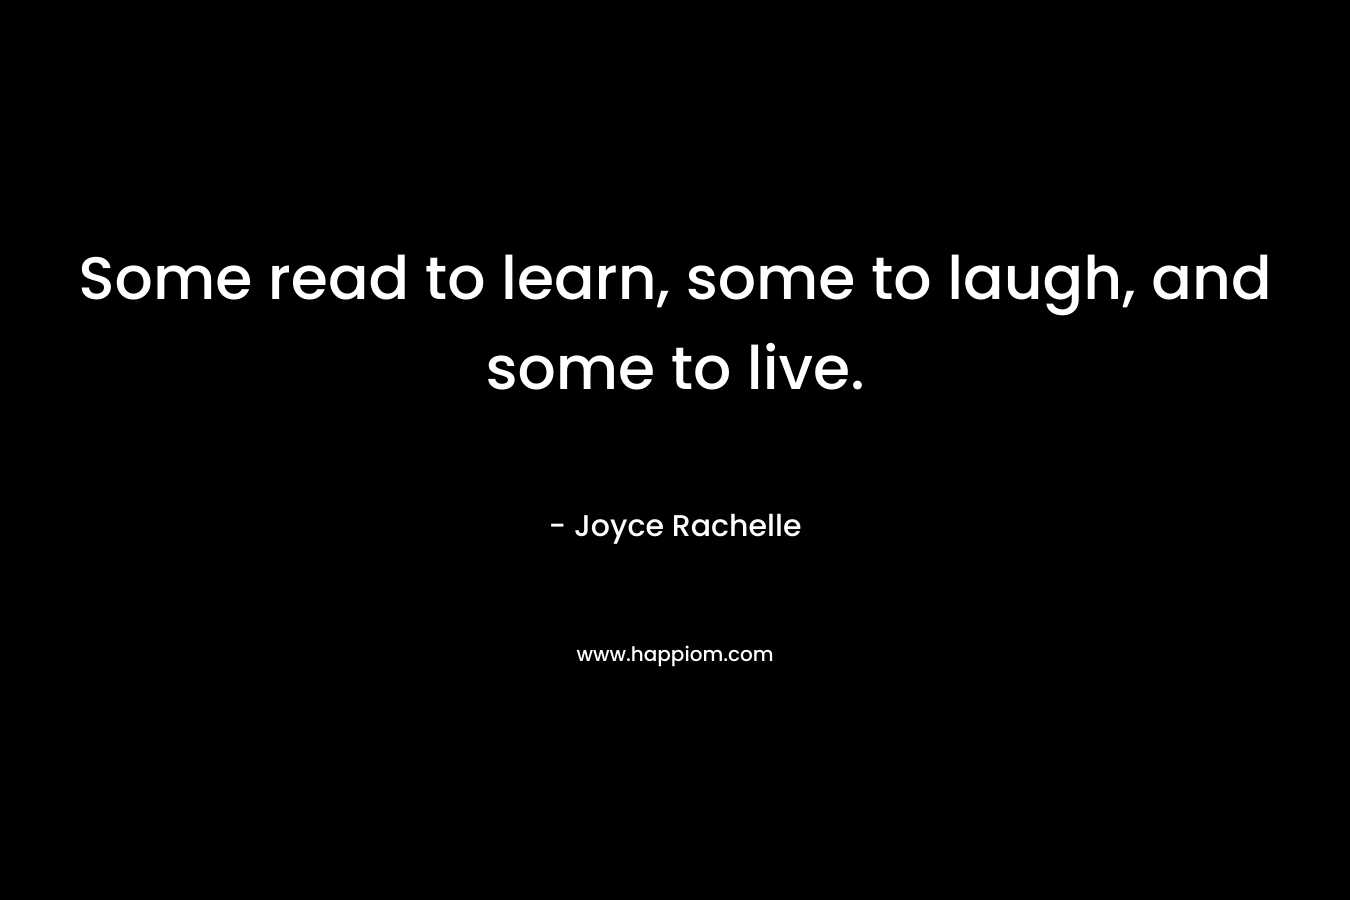 Some read to learn, some to laugh, and some to live.